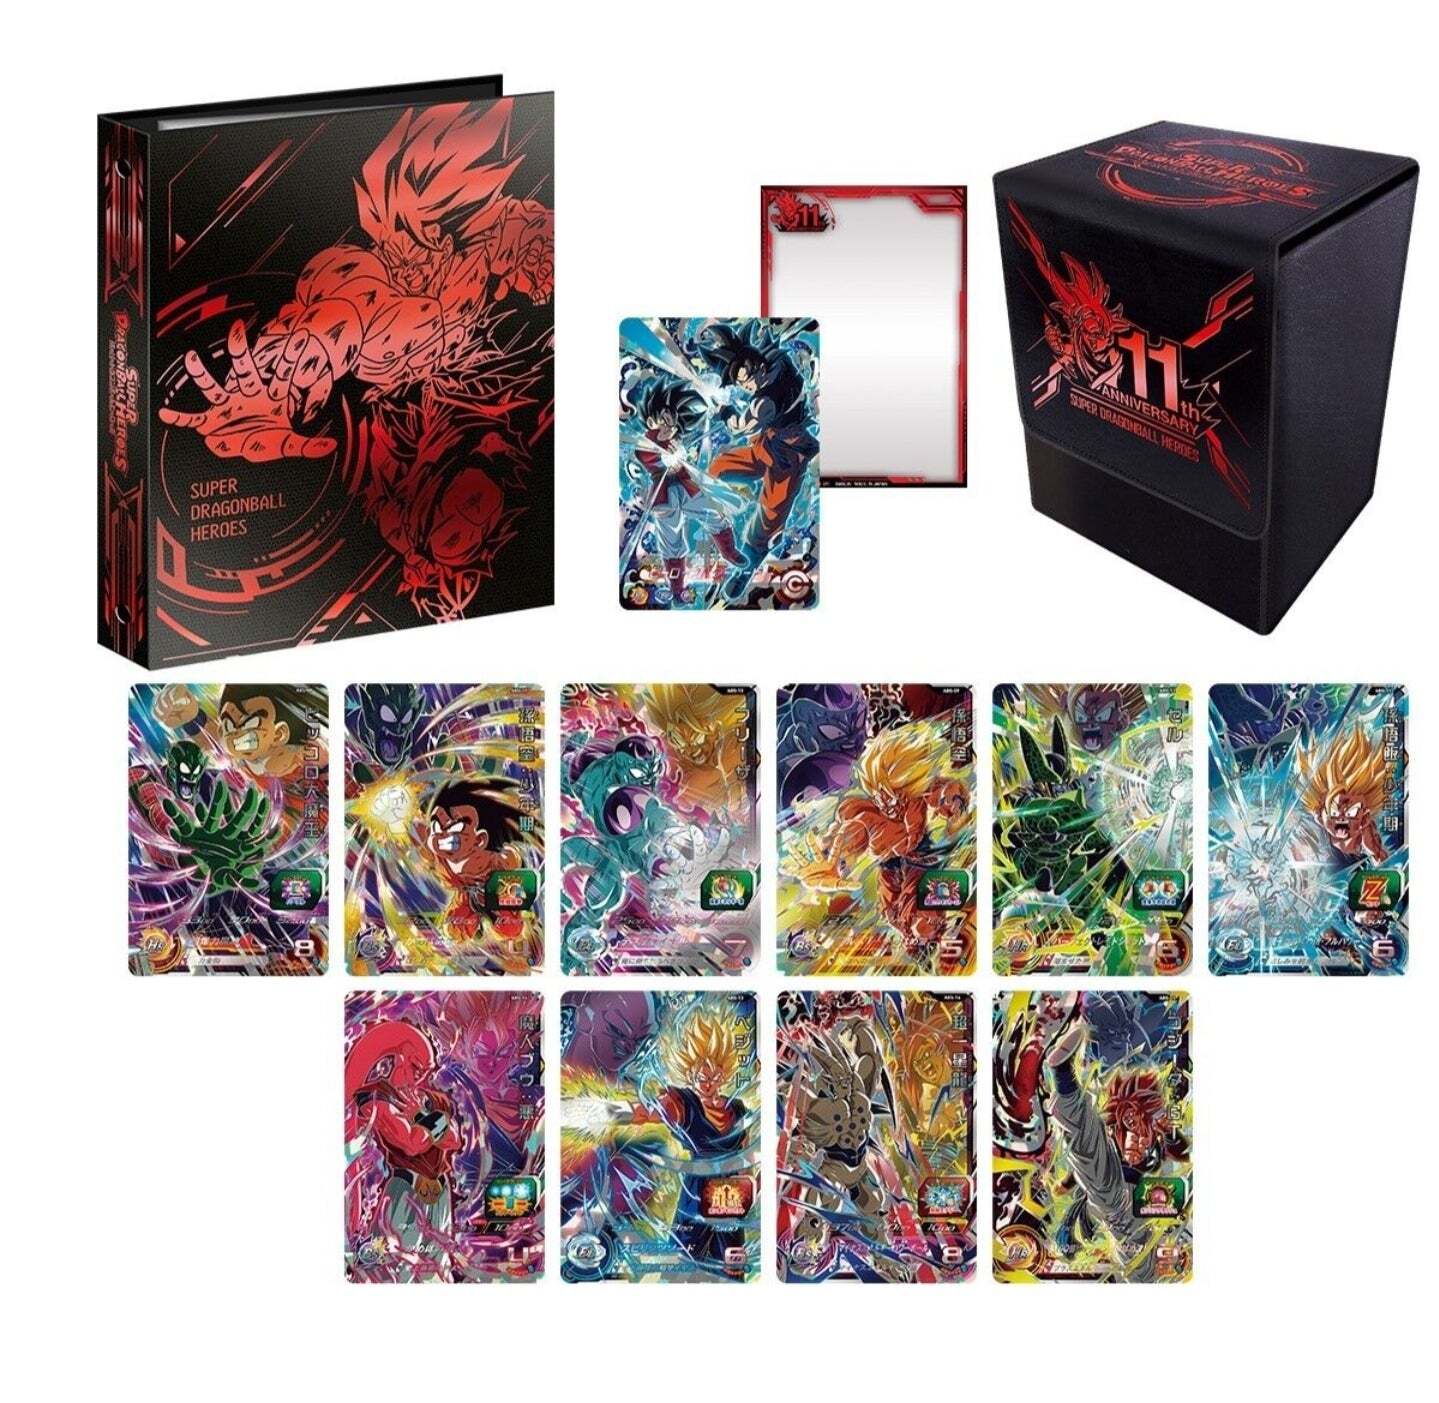 SUPER DRAGON BALL HEROES 11Th Anniversary SPECIAL Binder Set